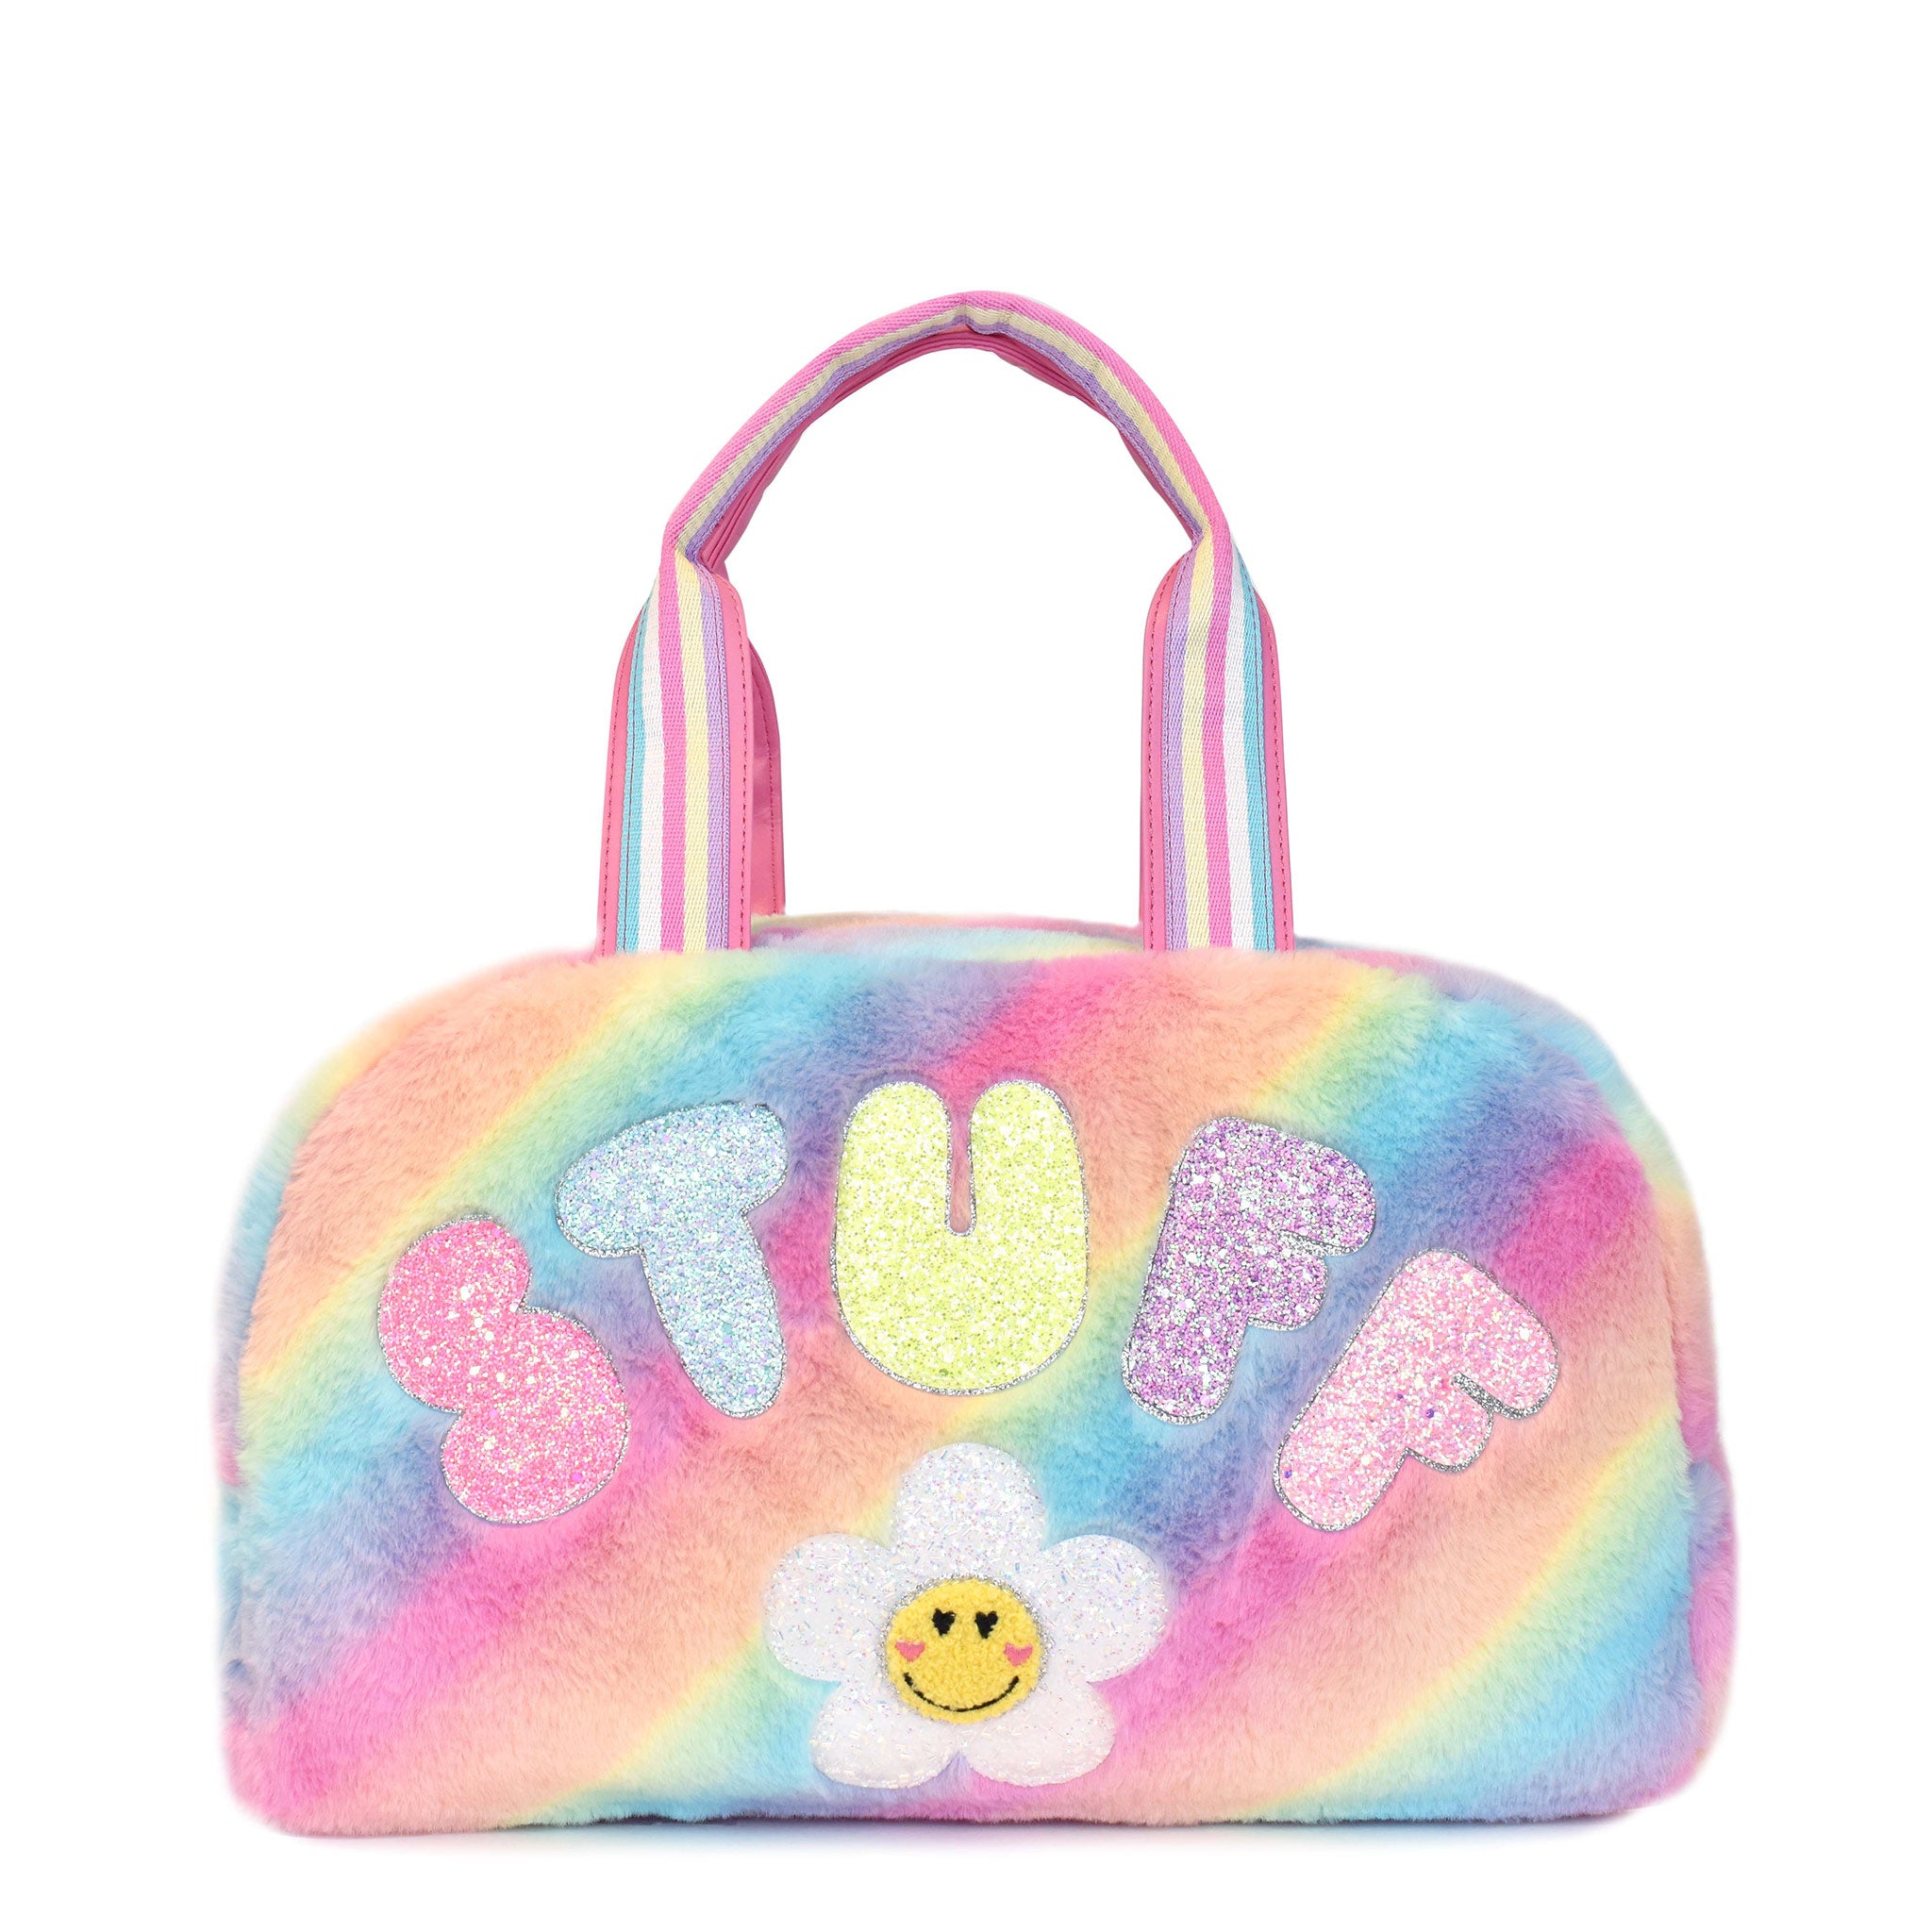 Front view of a rainbow ombre plush medium duffle bag with glitter bubble letters 'Stuff' and a daisy patch applique